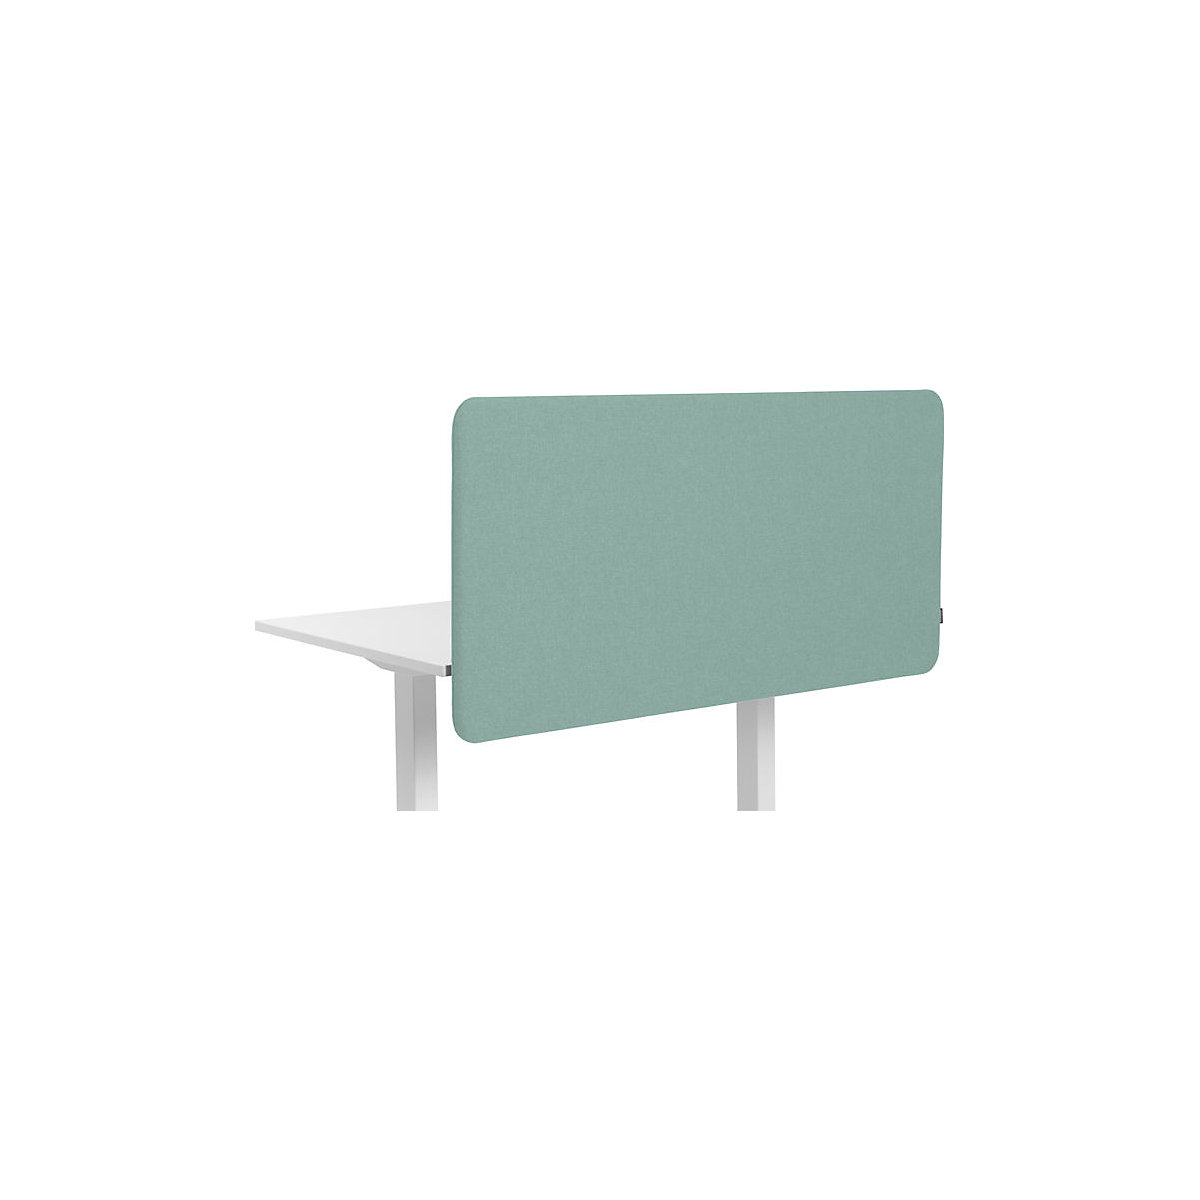 Softline Salsa acoustic desk partition, suspended downwards, HxW 650 x 600 mm, fabric, green-1